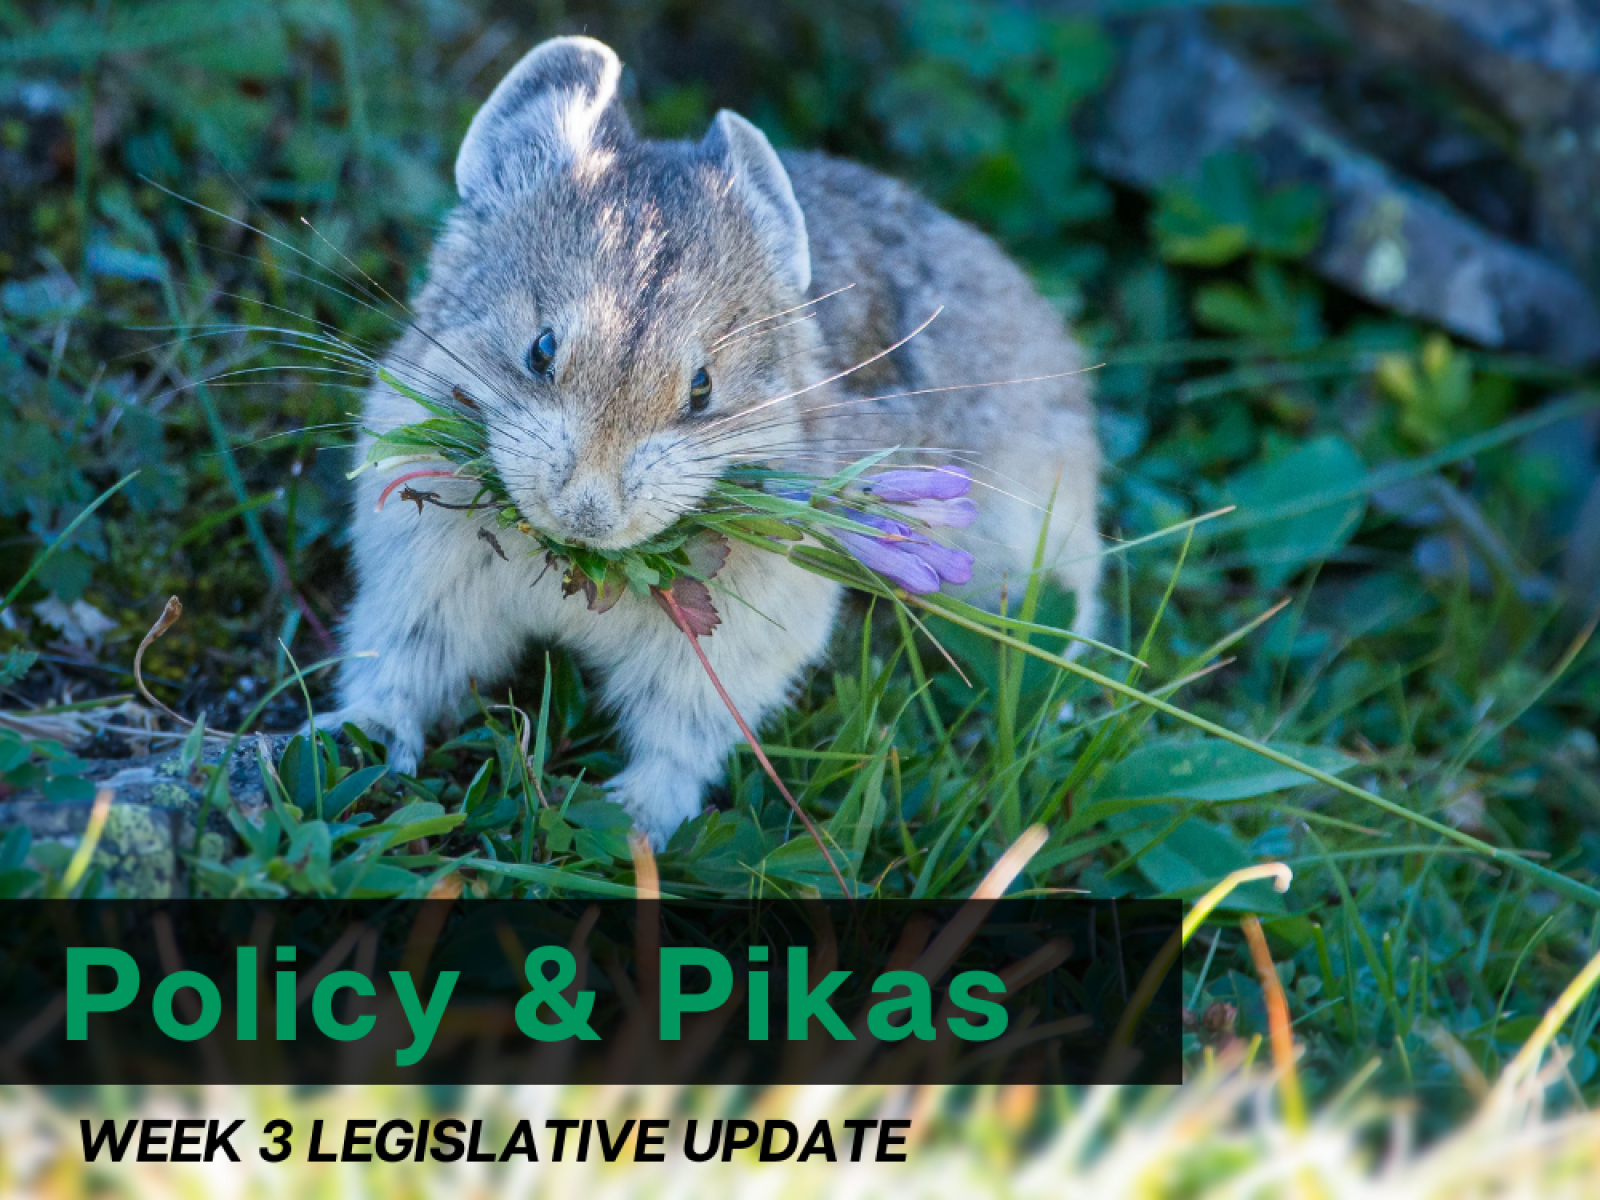 Policy and Pikas: Water Week